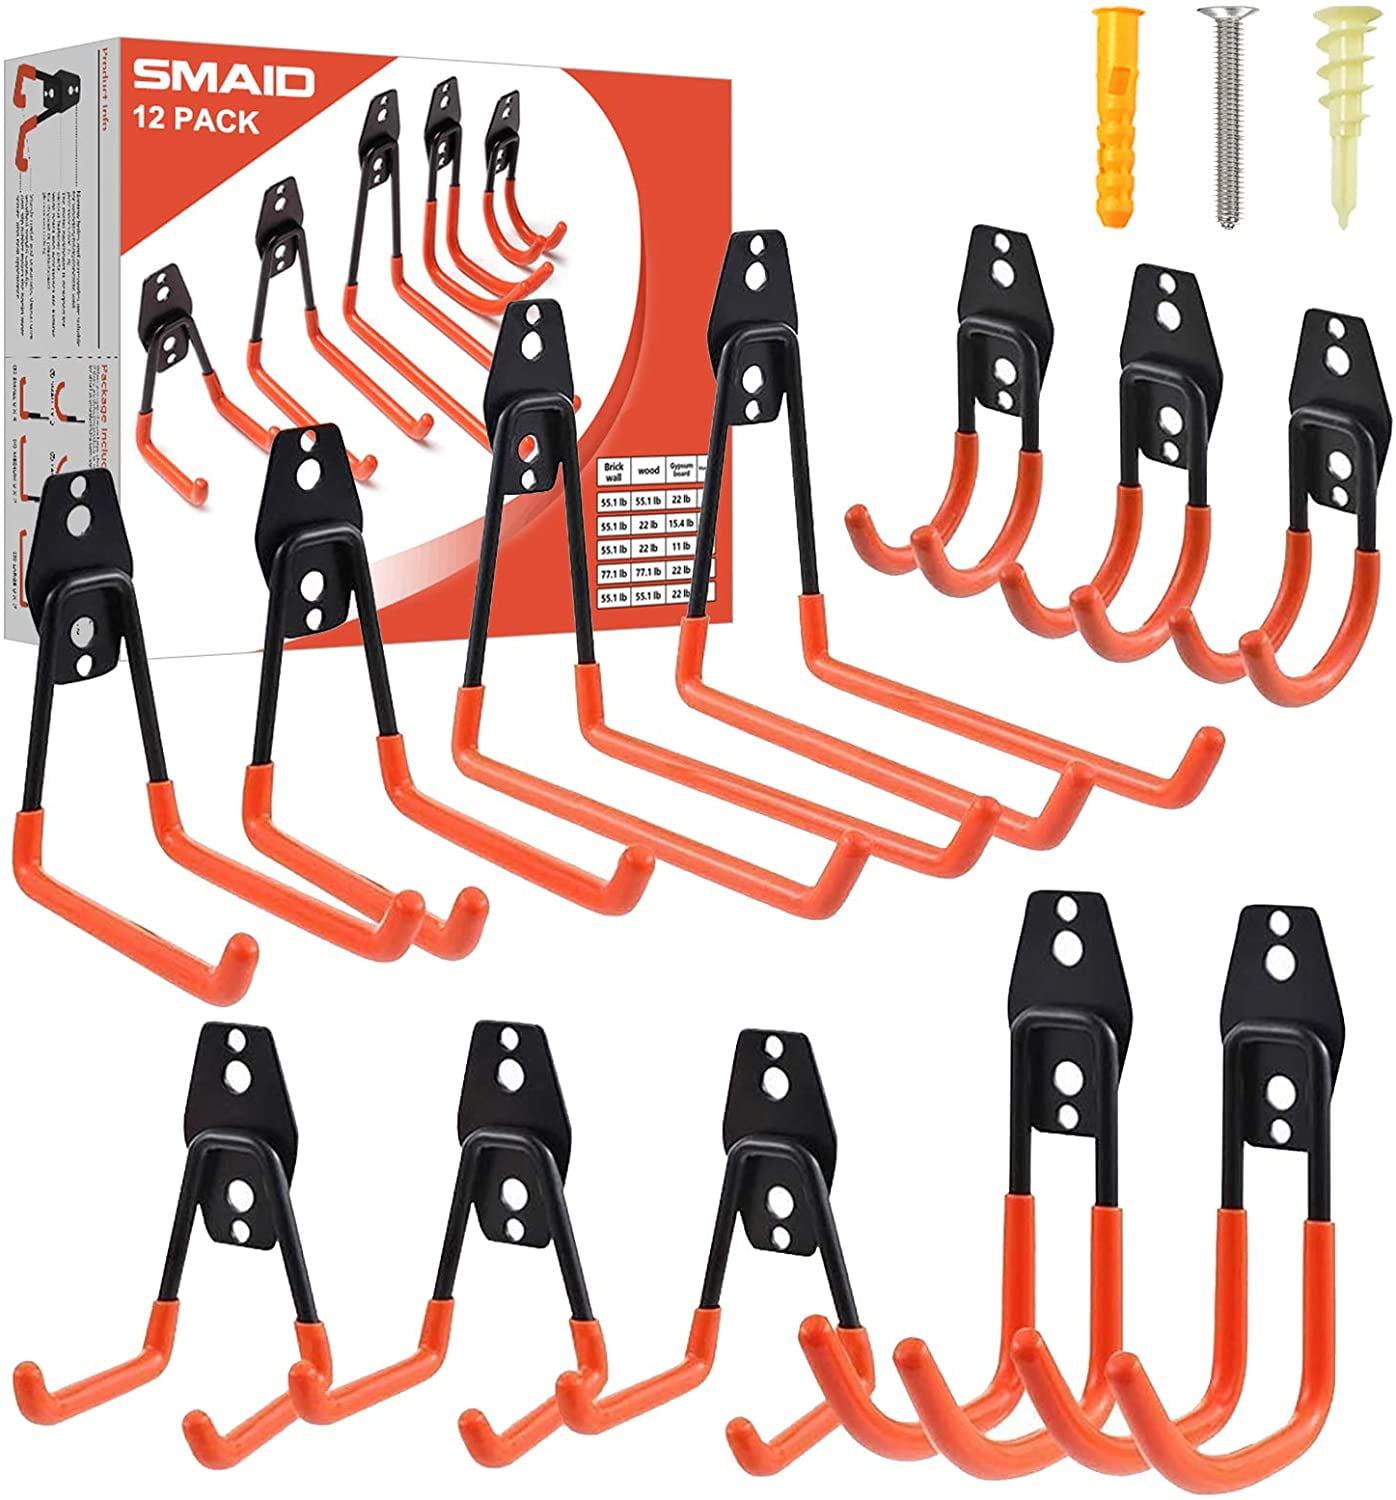 Steel Garage Storage Utility Double Hooks 12 PACK Wall Mount Hooks Garage Tool Hangers for Organizing Shed Garden Tools Ropes Bikes Garage Hooks Heavy Duty Ladders Bulky Items 